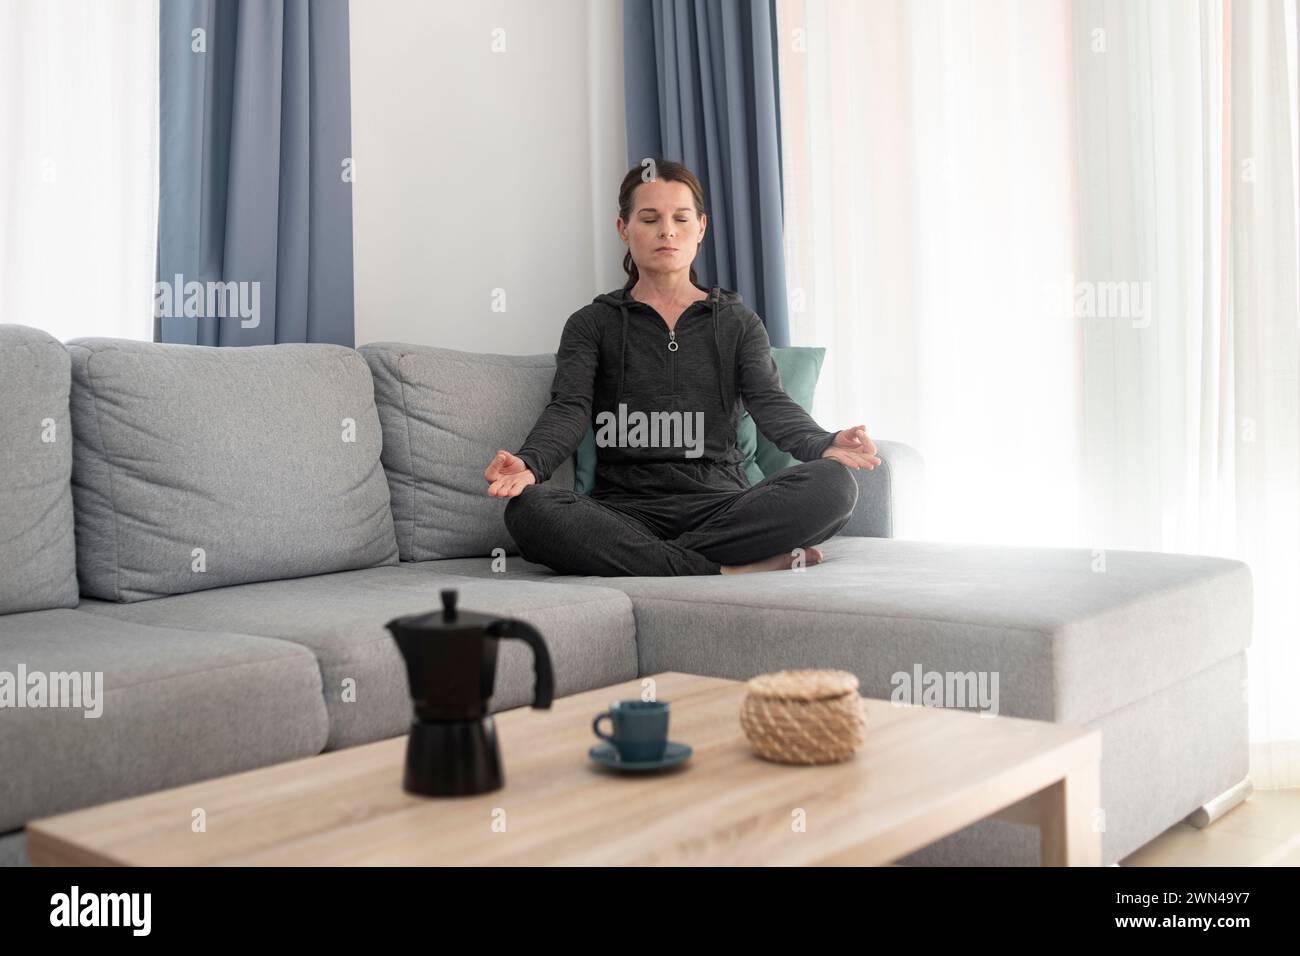 Woman sitting  on a couch, meditating with closed eyes. Relaxation, stress relief concept. Stock Photo